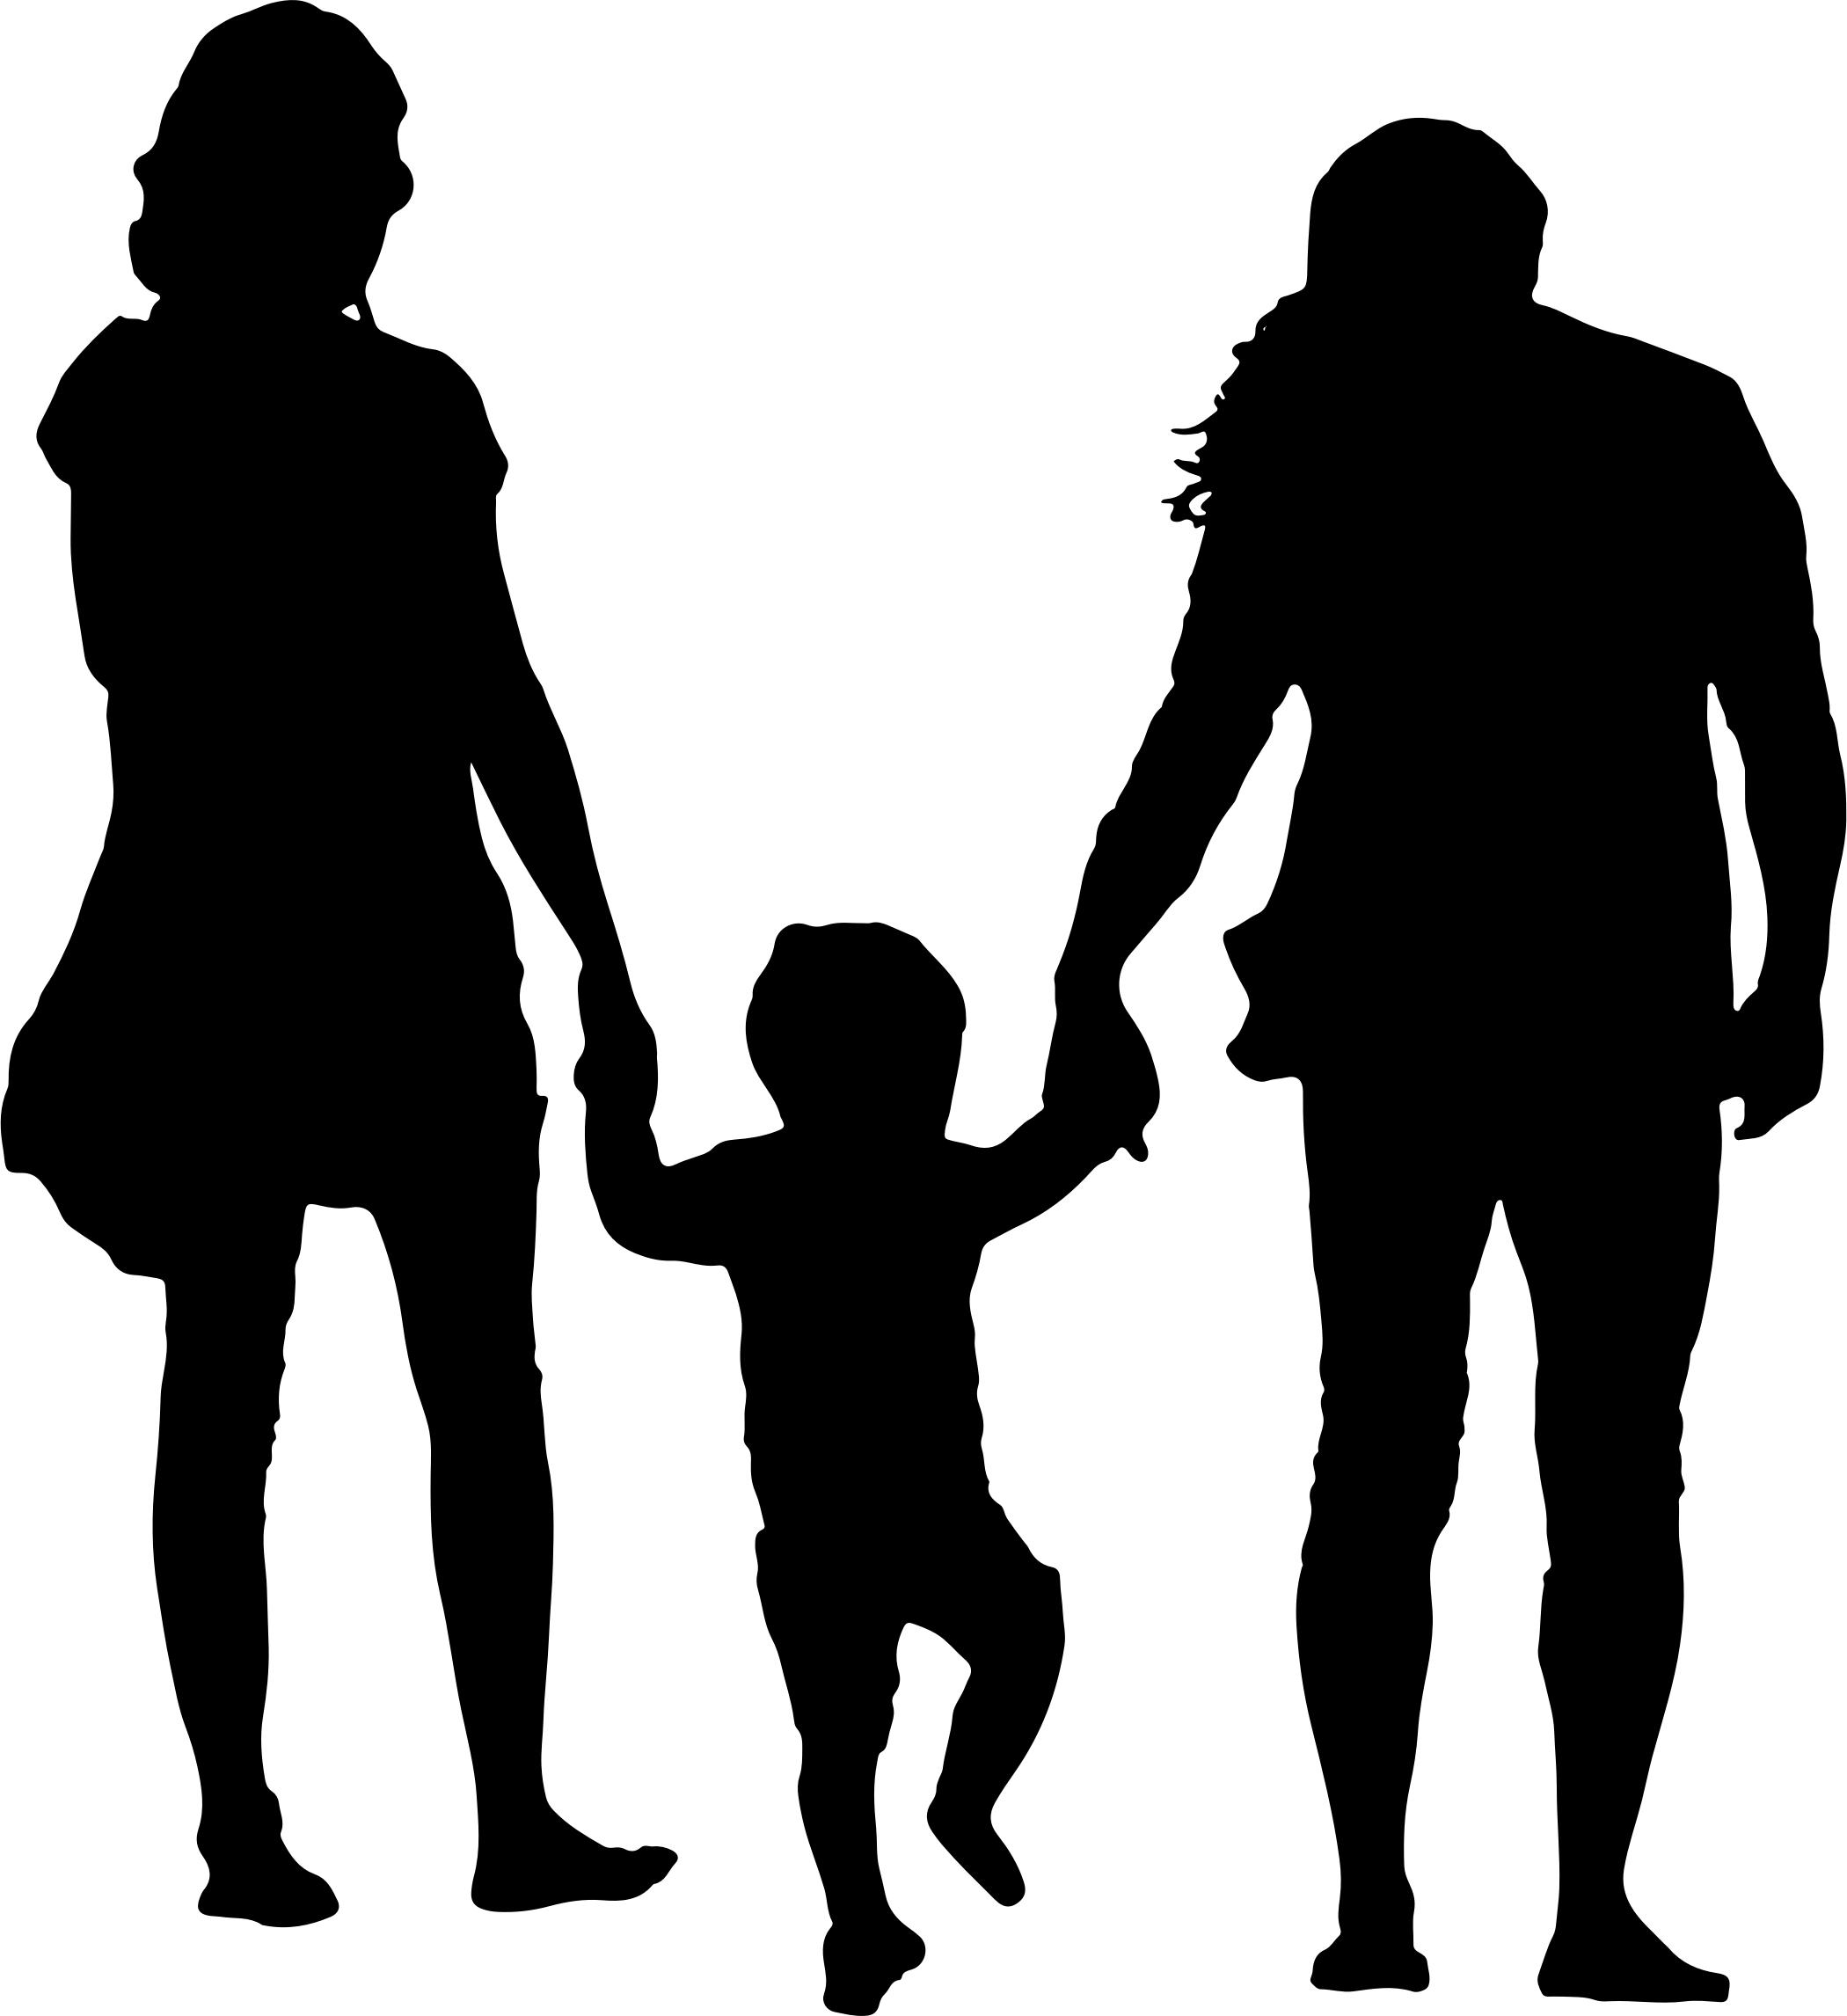 Family With Child In The Middle Silhouette png icons